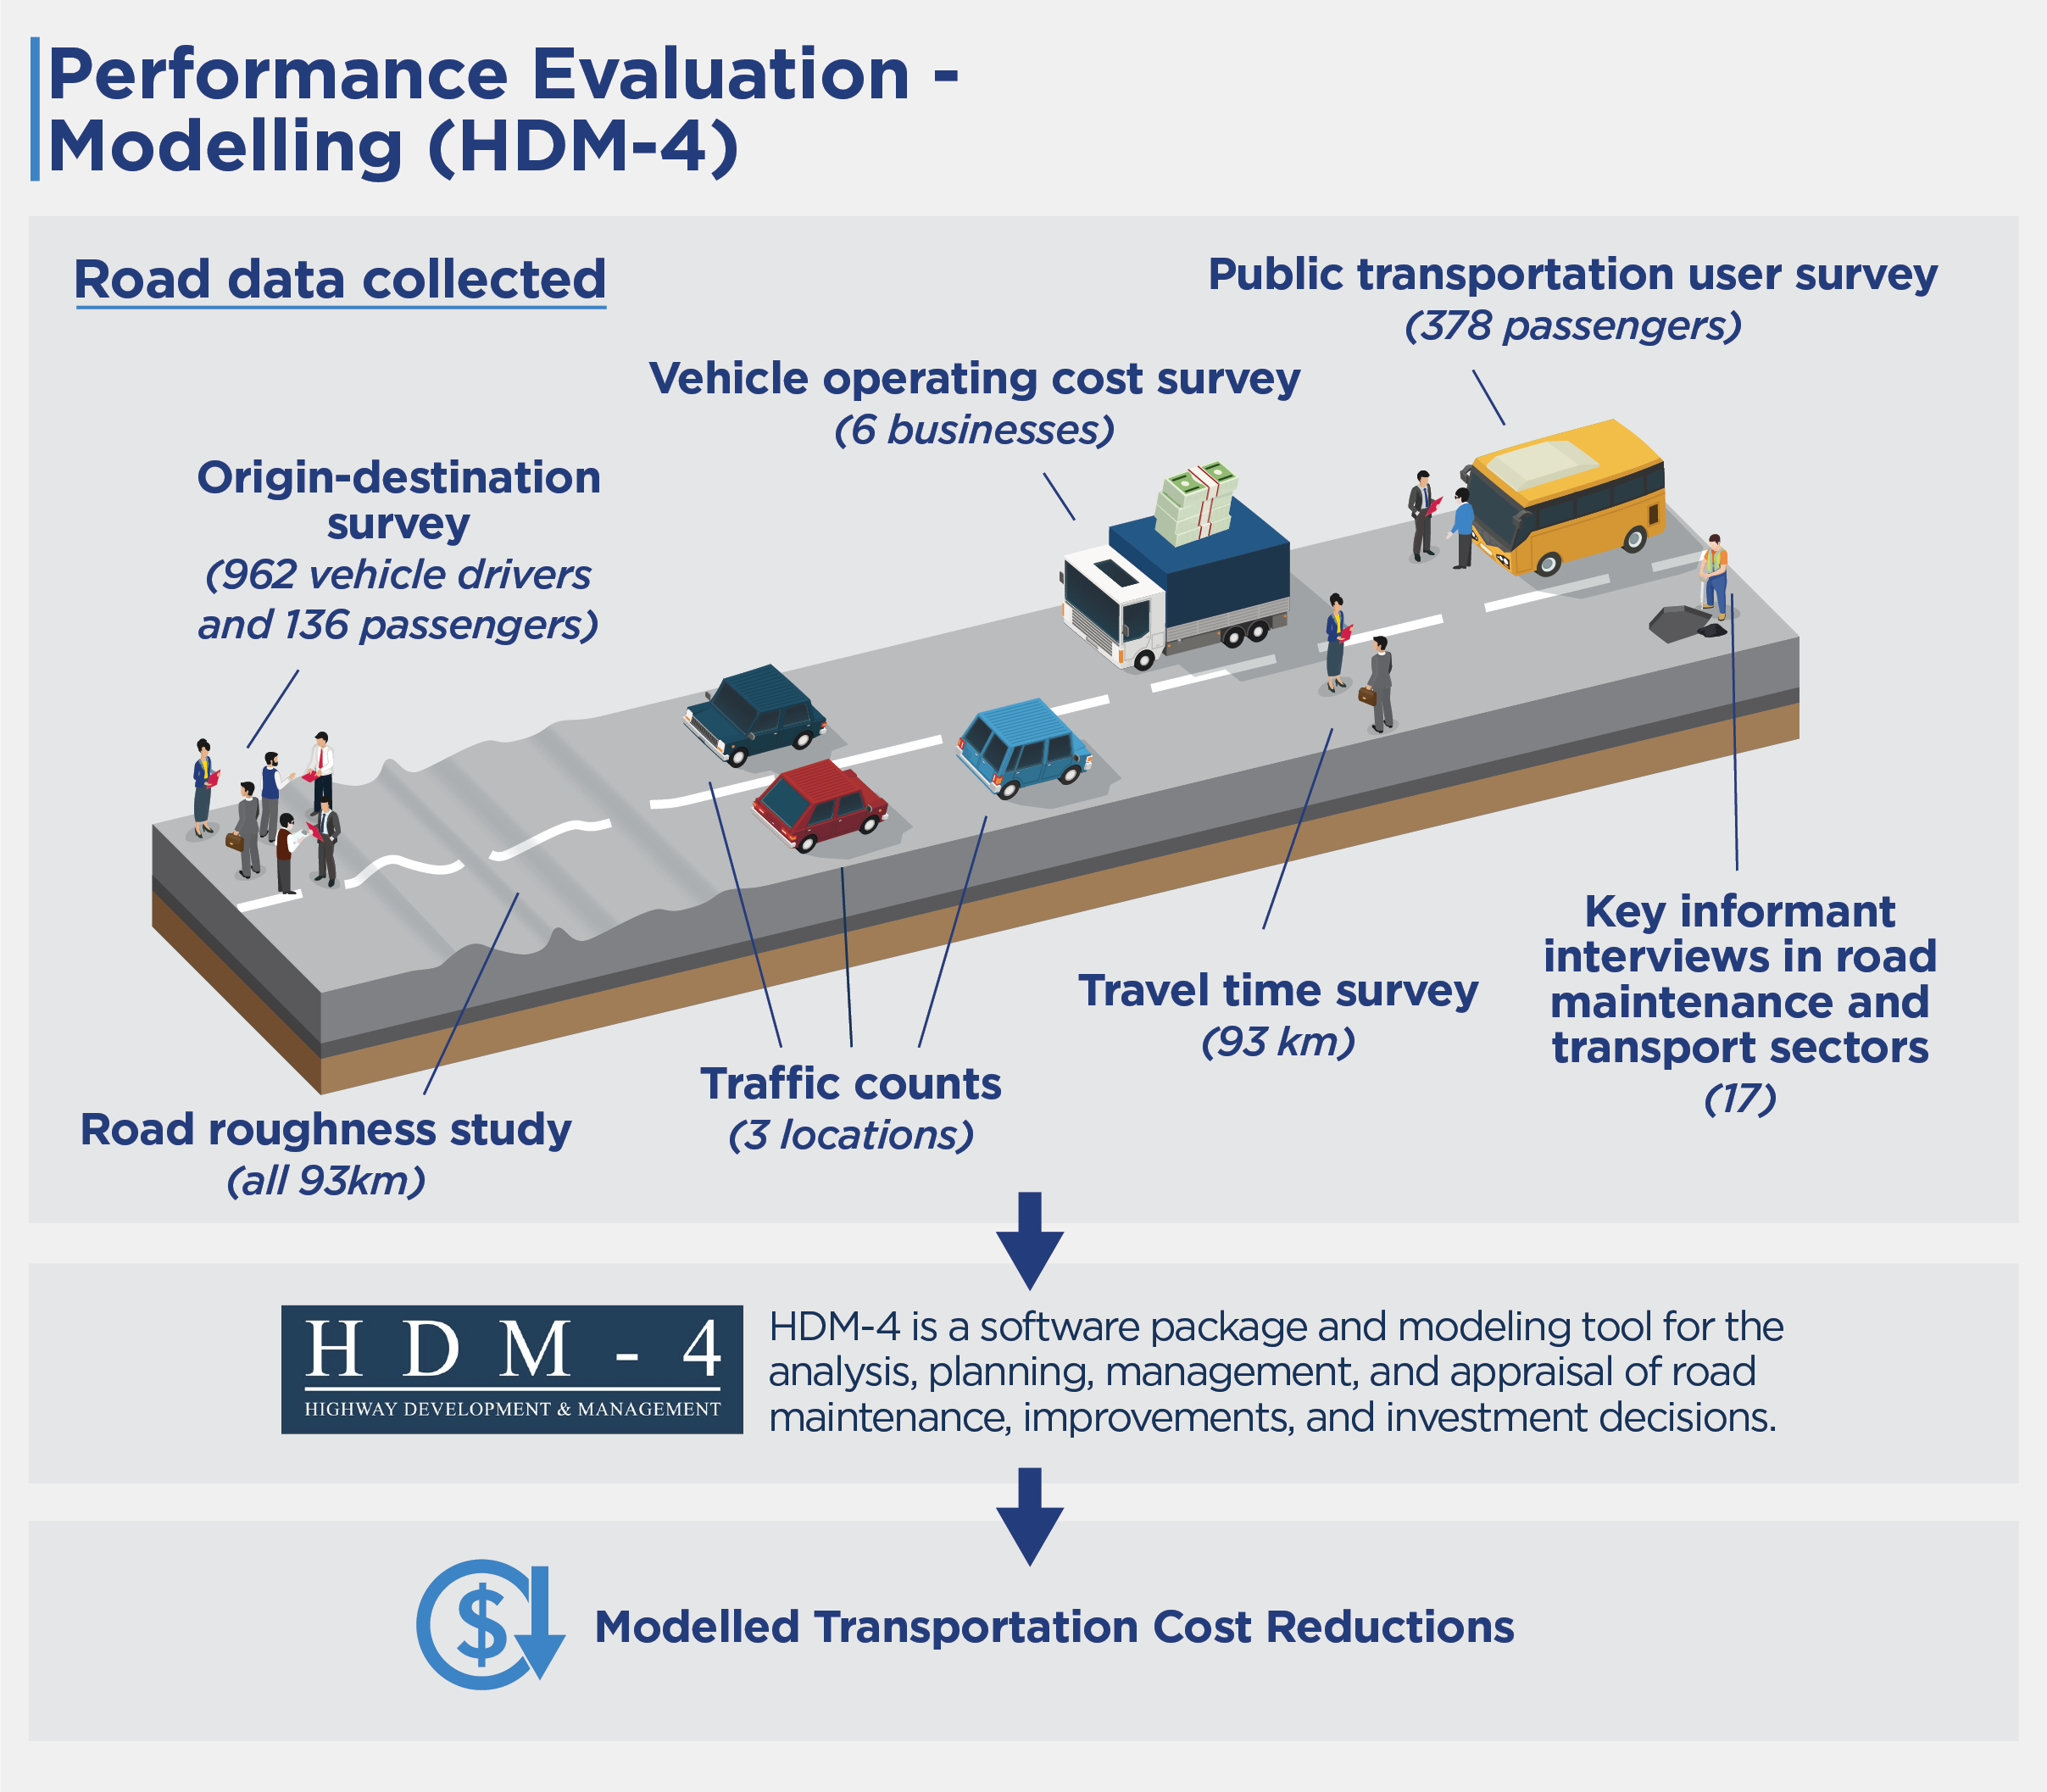 Road data was collected through a origin-destination survey; vehicle operating cost survey; public transportation user survey; road roughness study; traffic counts; travel time survey and key informant interviews. This was brought into the HDM-4 software package and modeling tool, resulting in modeled transportation cost reductions.